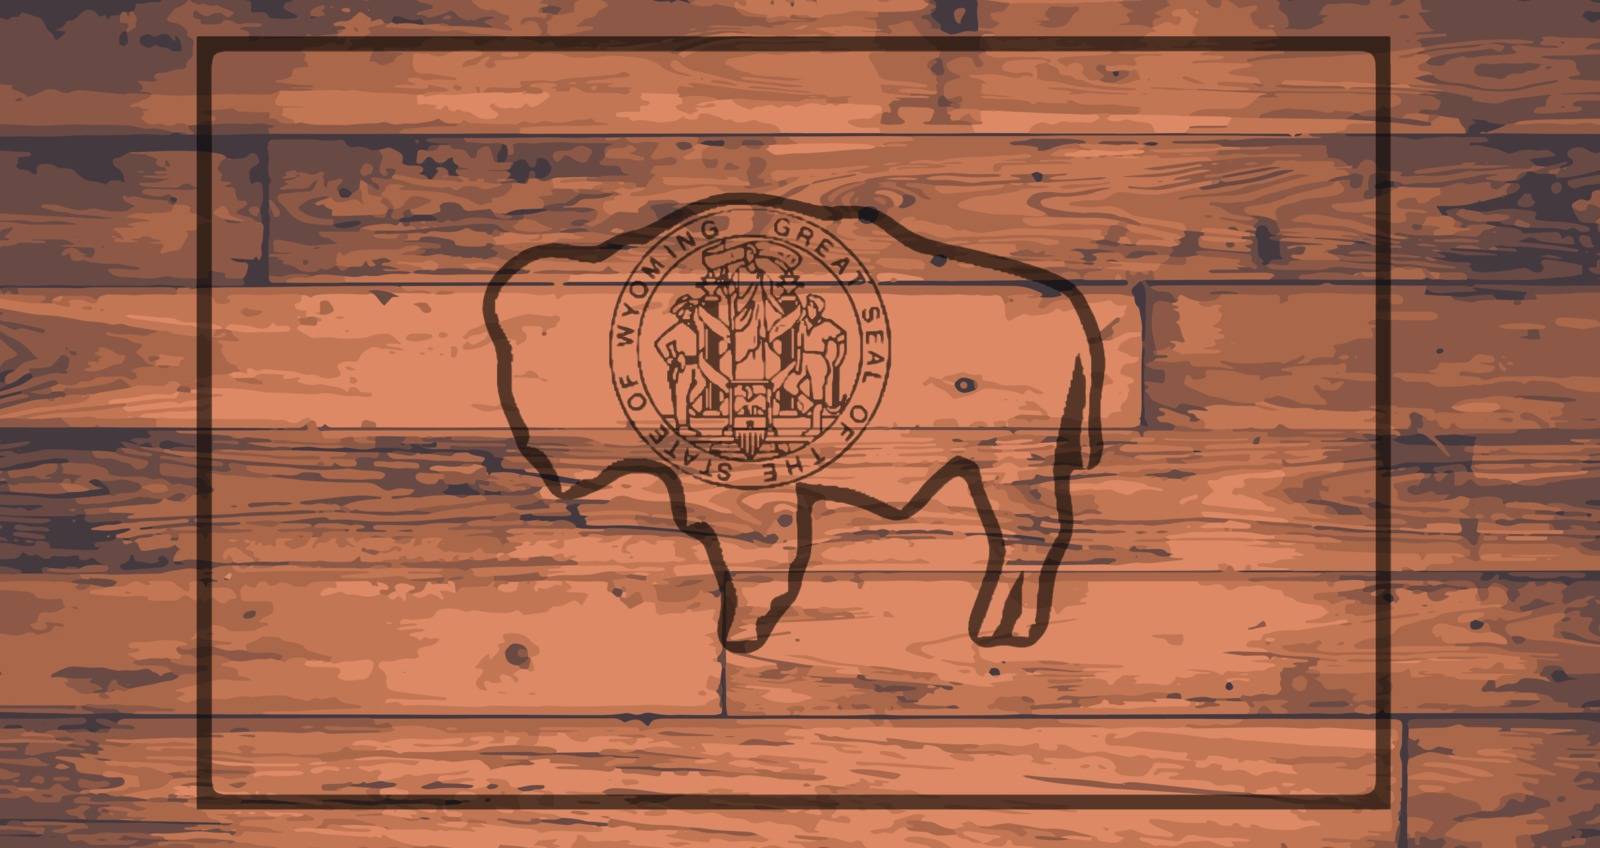 Wyoming State Flag branded onto wooden planks